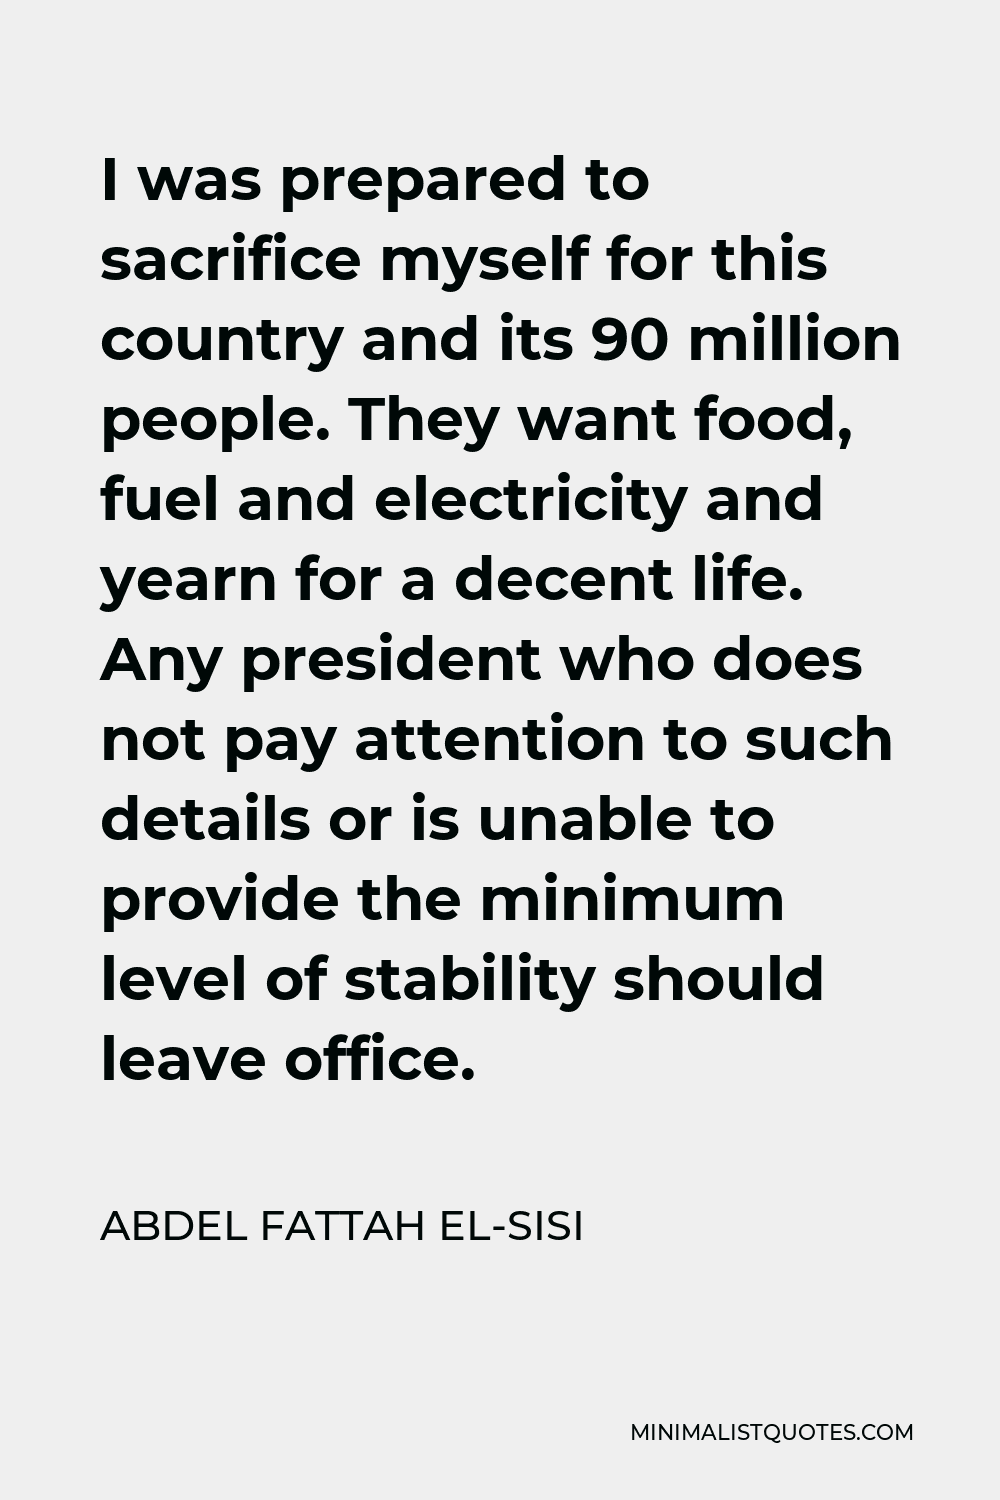 Abdel Fattah el-Sisi Quote - I was prepared to sacrifice myself for this country and its 90 million people. They want food, fuel and electricity and yearn for a decent life. Any president who does not pay attention to such details or is unable to provide the minimum level of stability should leave office.